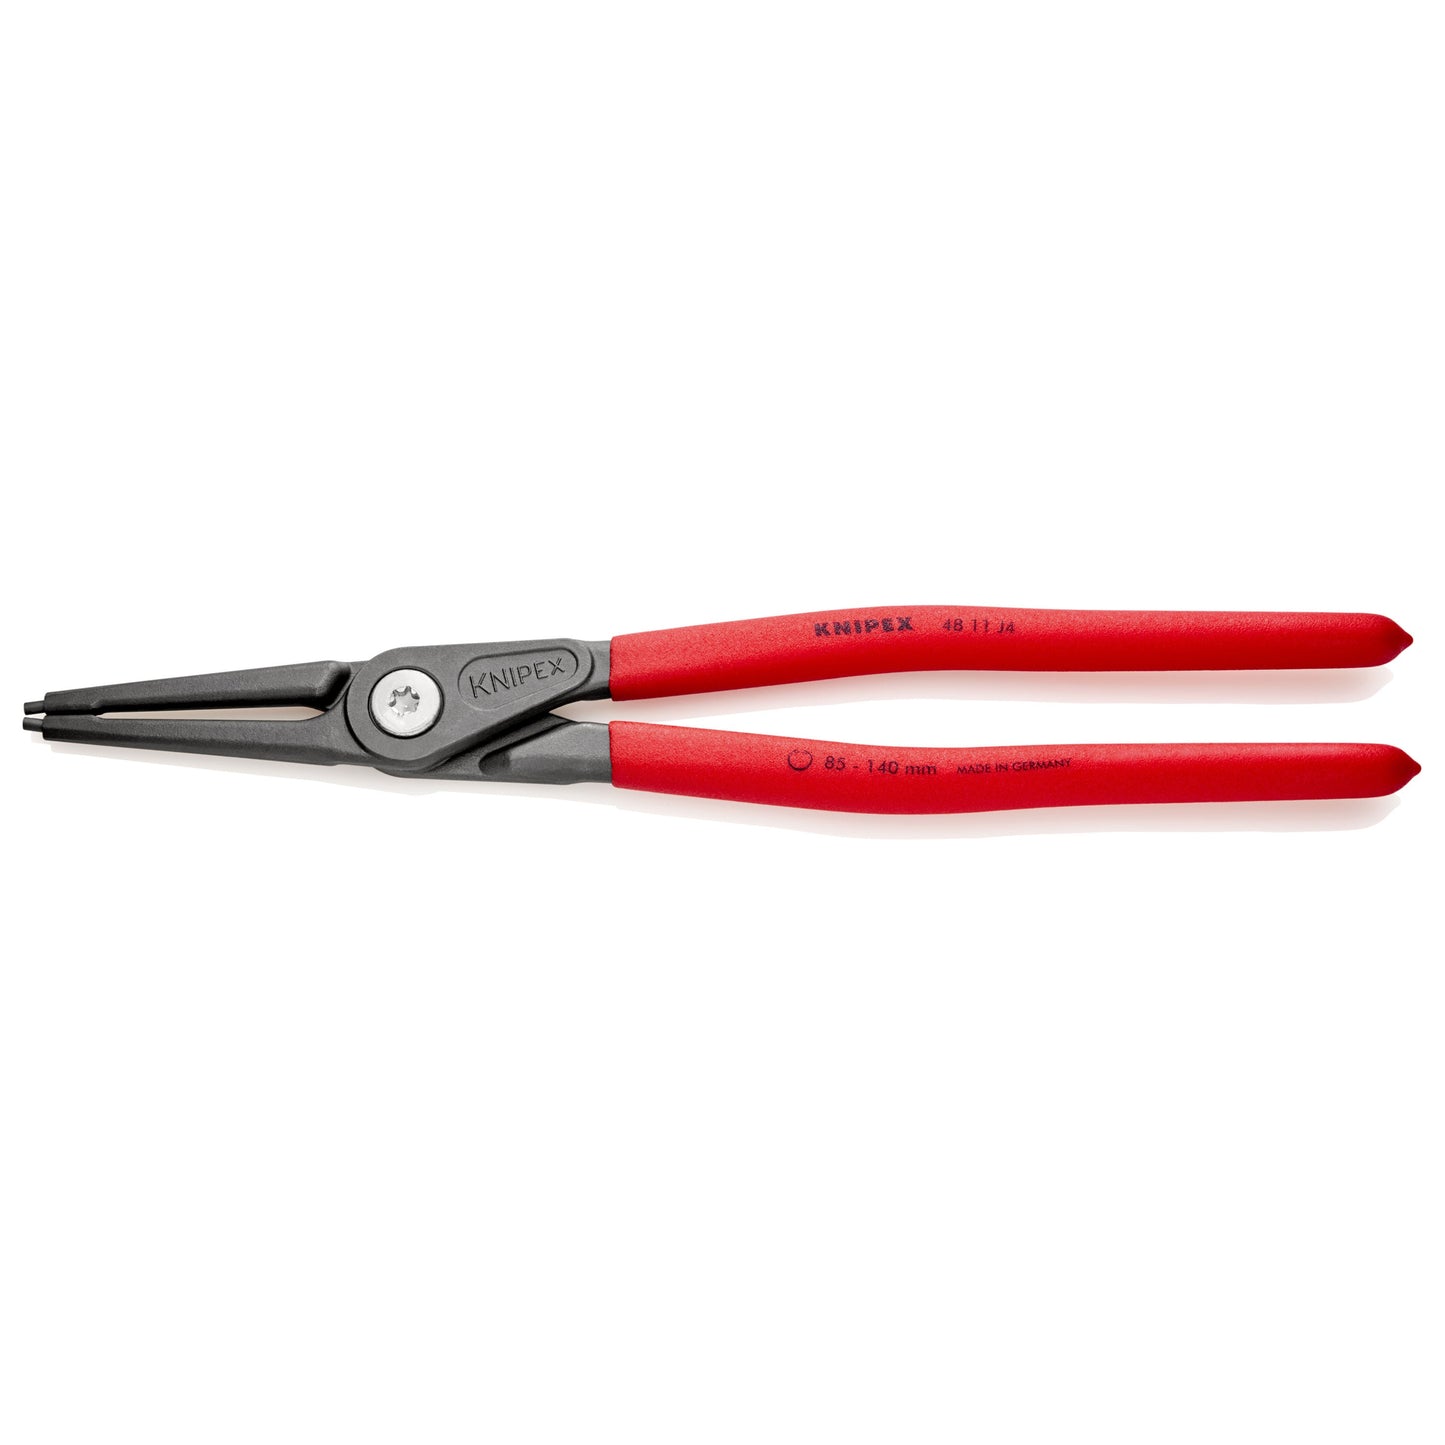 Knipex 48 11 J4 - Straight precision pliers for internal washers, for washers from 85 to 140 mm